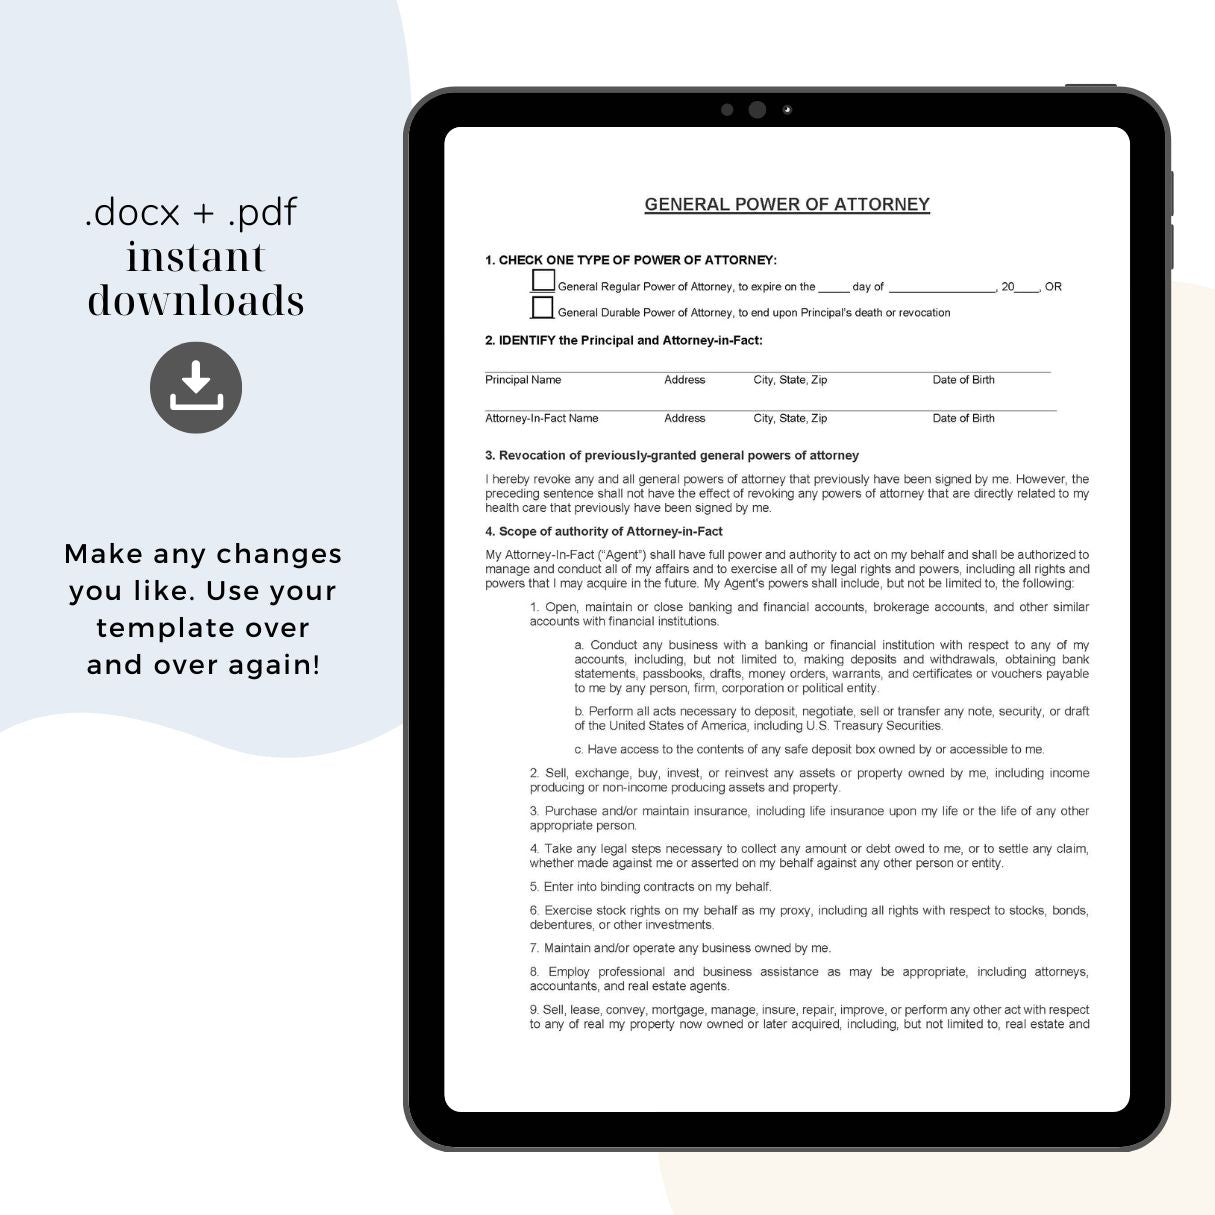 Power of Attorney Template, Attorney-Written & Editable Instant Download